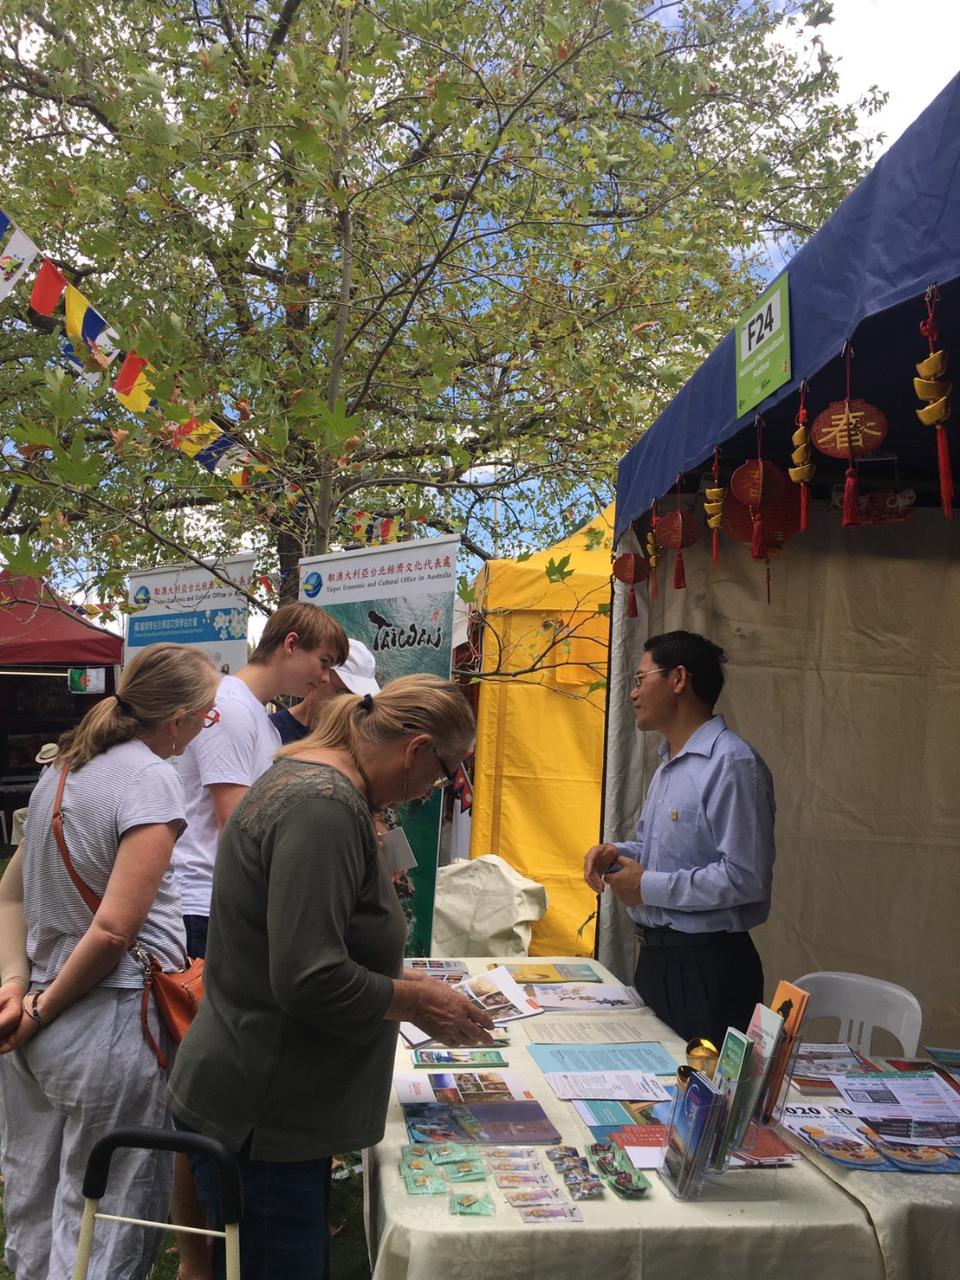 Aaron Chen, executive director of the Education Division, introducing Taiwanese culture and opportunities to study in Taiwan, at TECO's information stall at the 2020 National Multicultural Festival.